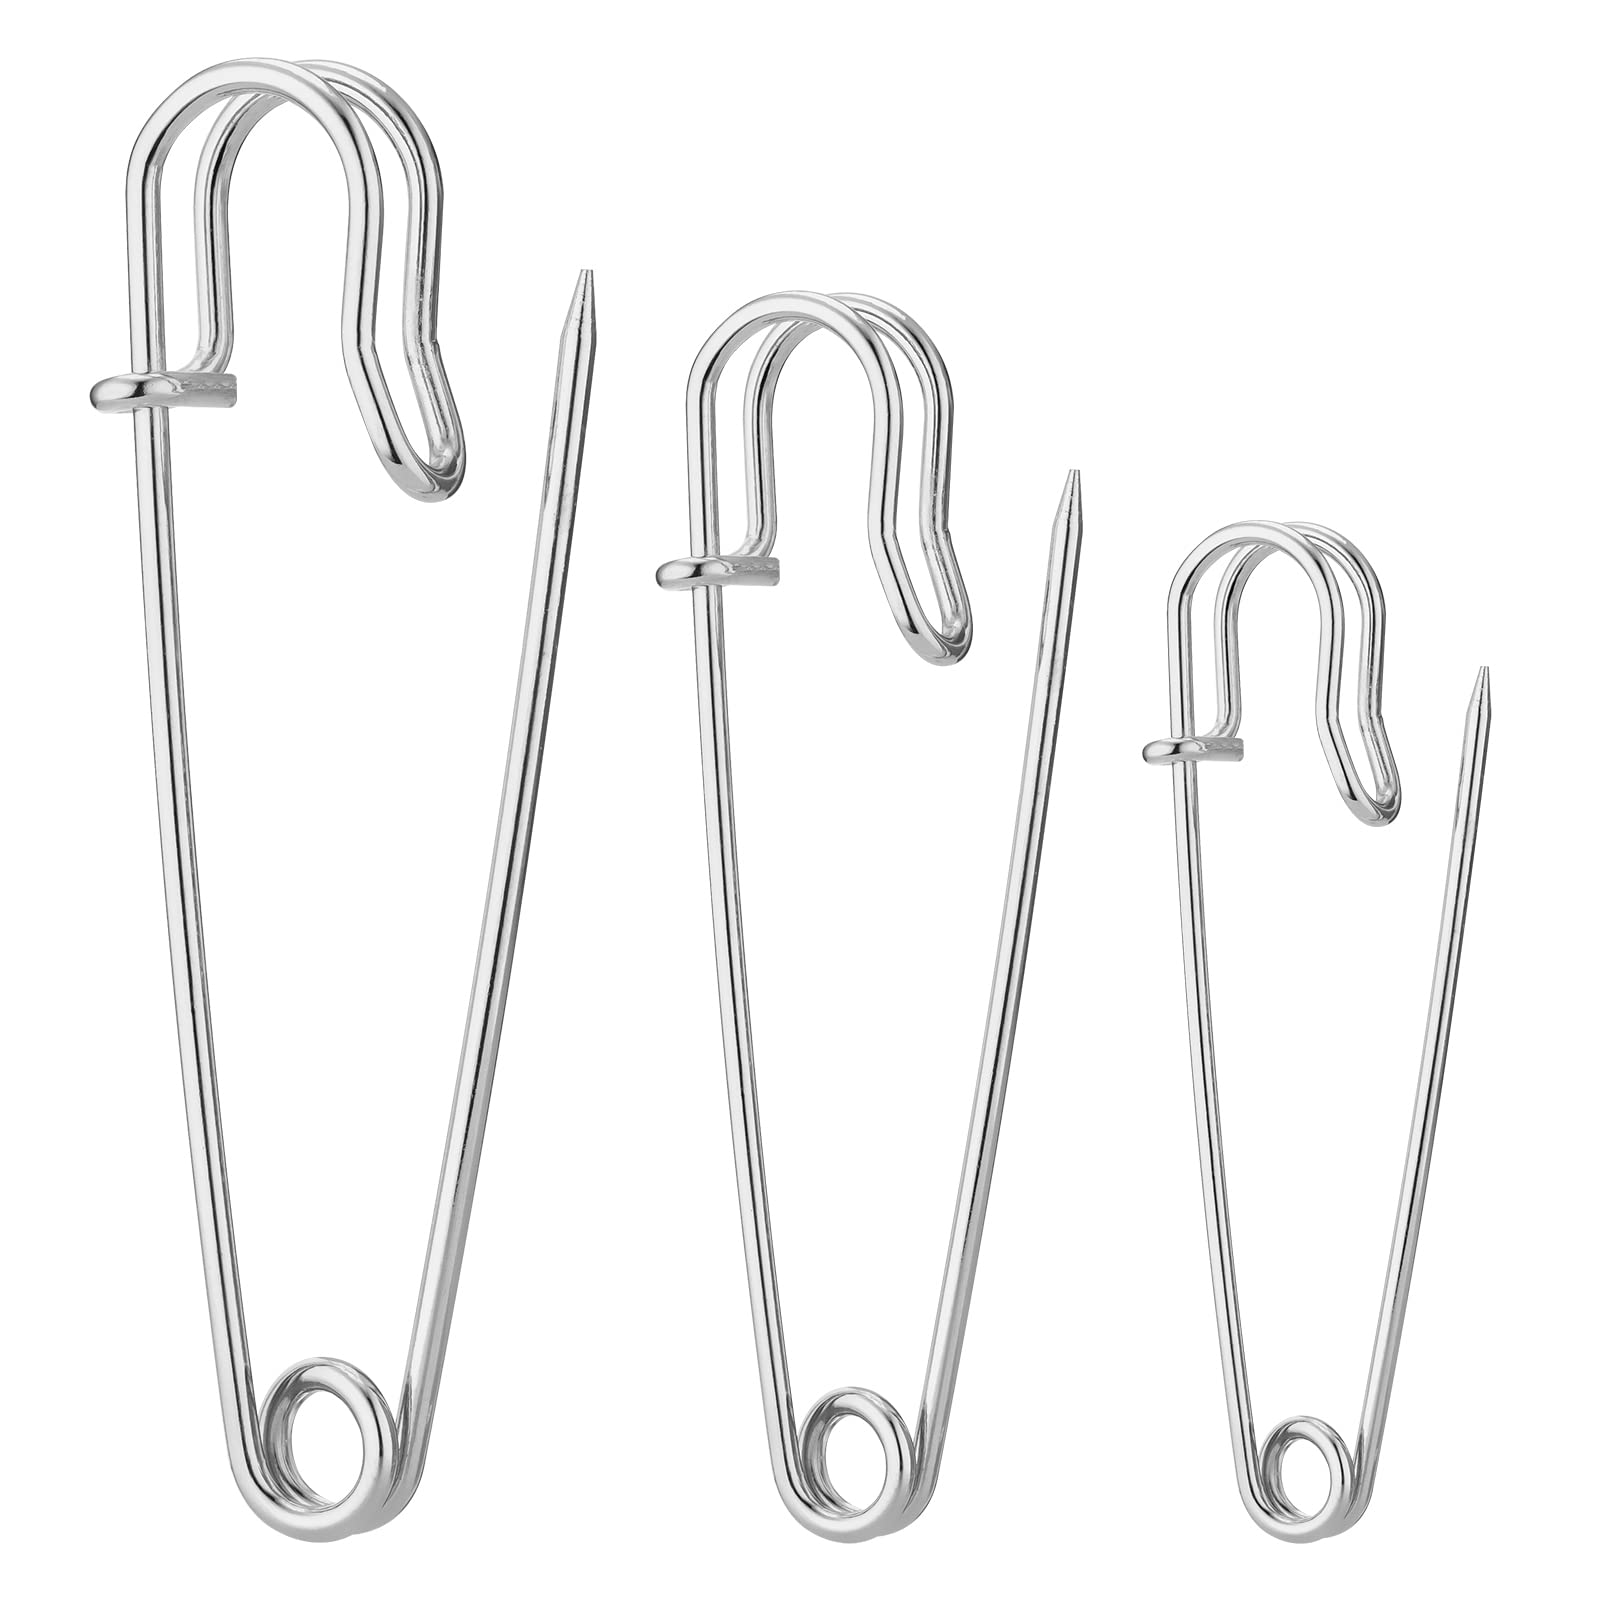 Large Safety Pins Pack of 40 Safety Pins Heavy Duty Assorted (2 2.5 3)  Blanket Pins Safety Pin Extra Sturdy Bulk Pins for Blankets Skirts Crafts  Kilts